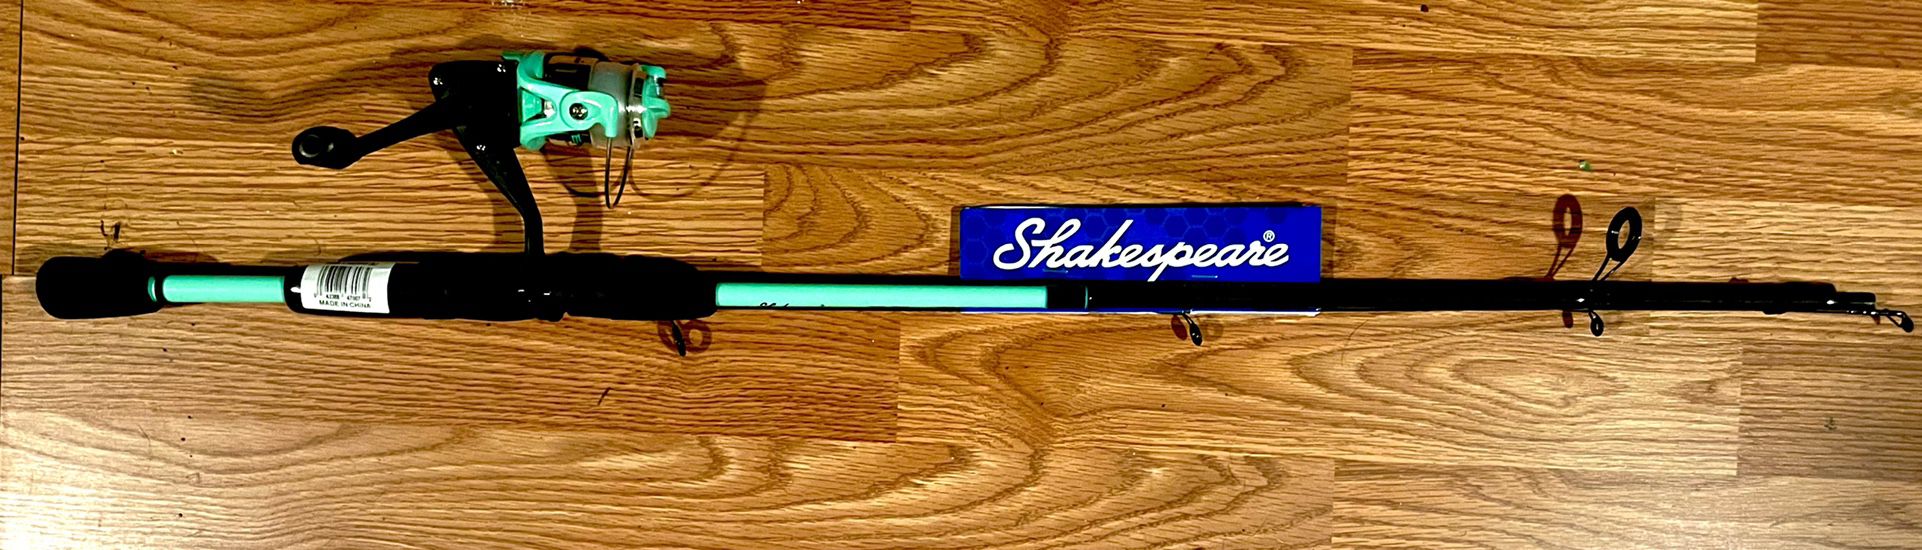 Shakespeare Reverb Fishing Pole Turquoise for Sale in Birmingham